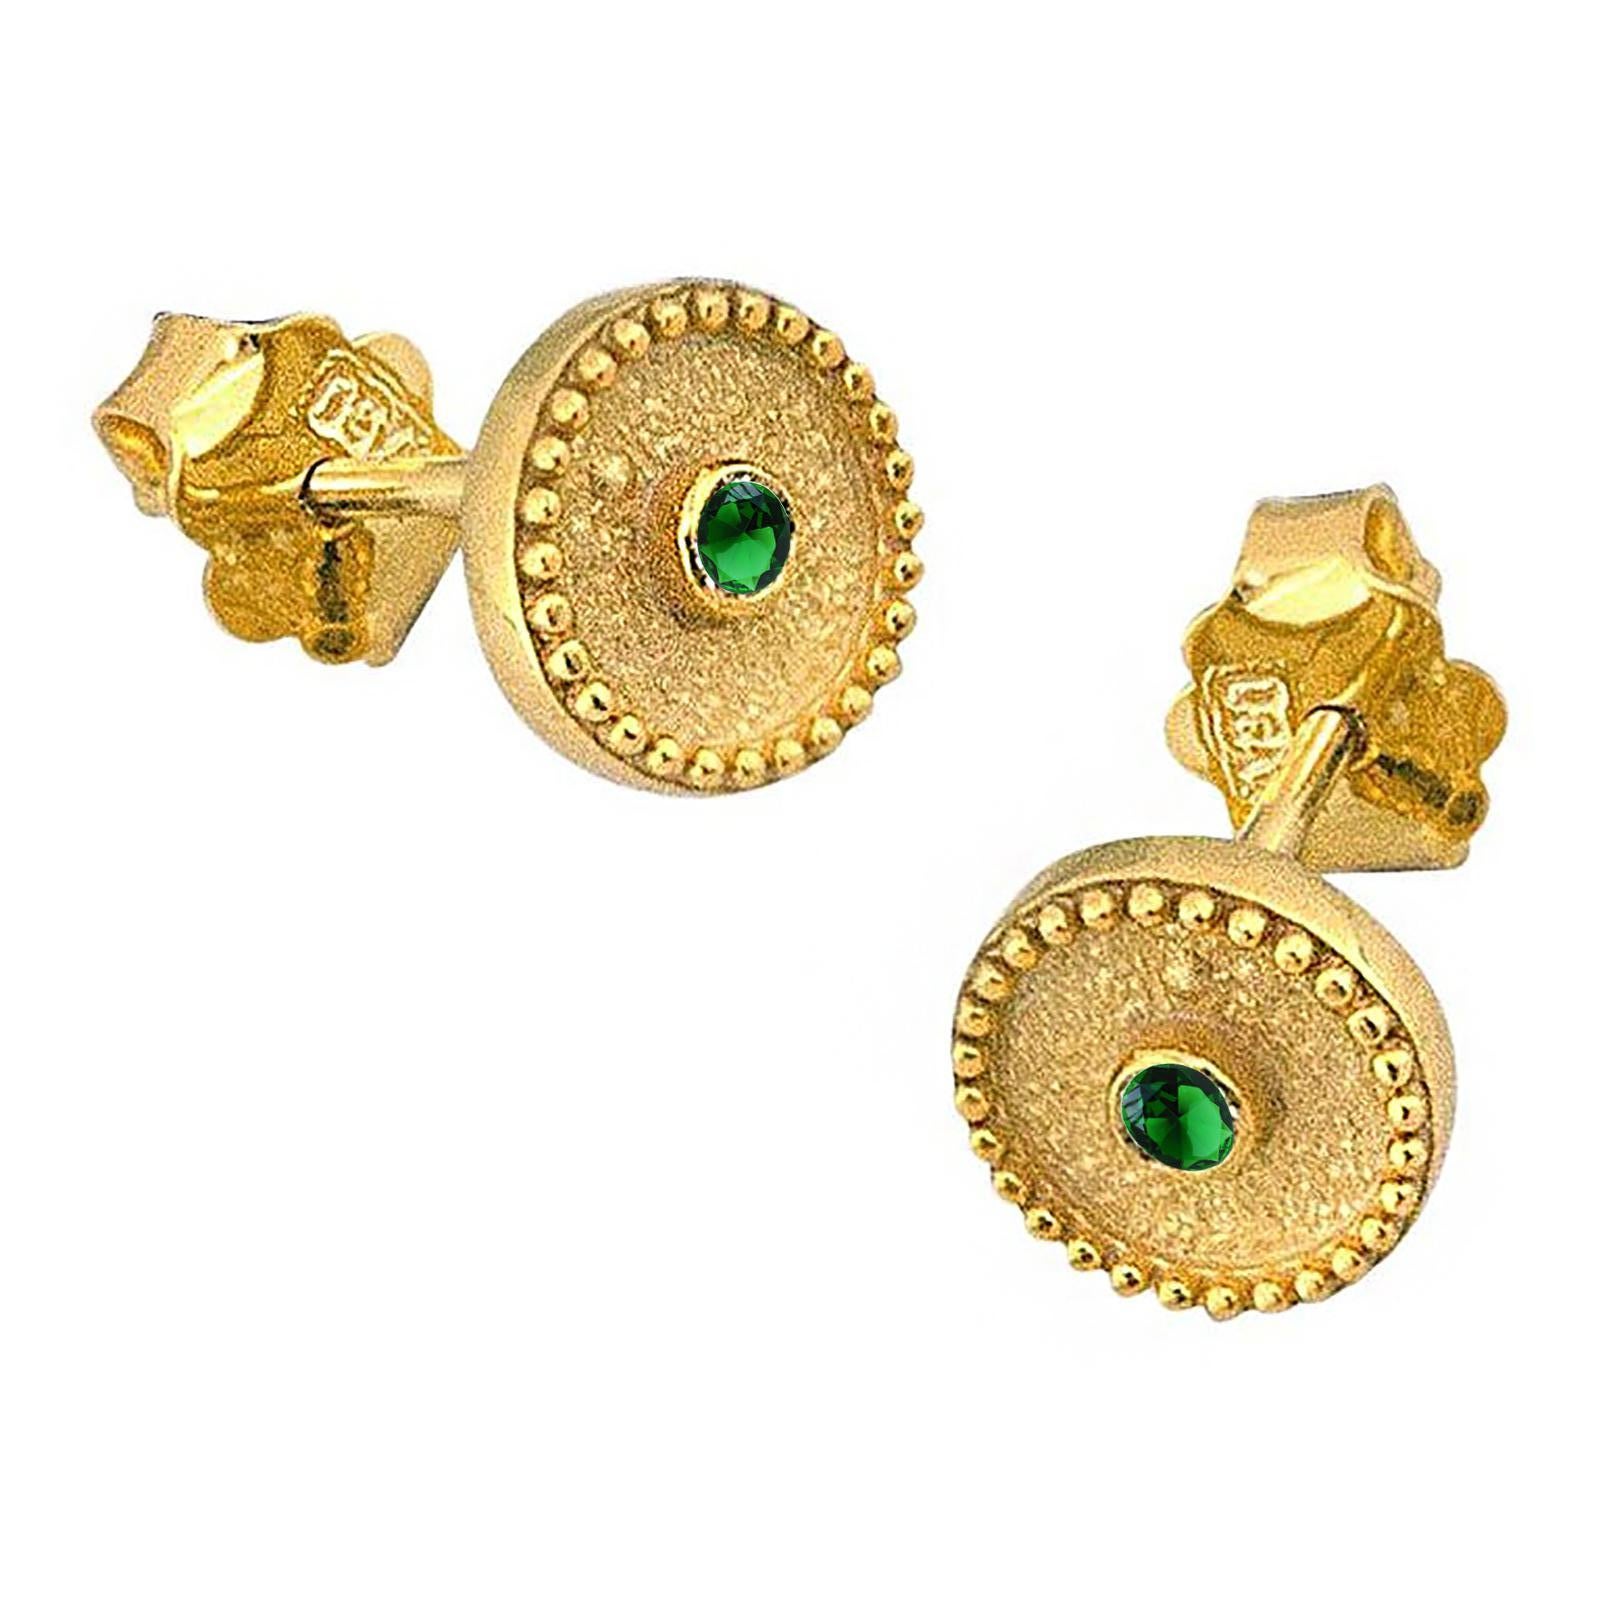 Round Cut Georgios Collections 18 Karat Yellow Gold Solitaire Emerald Stud Earrings